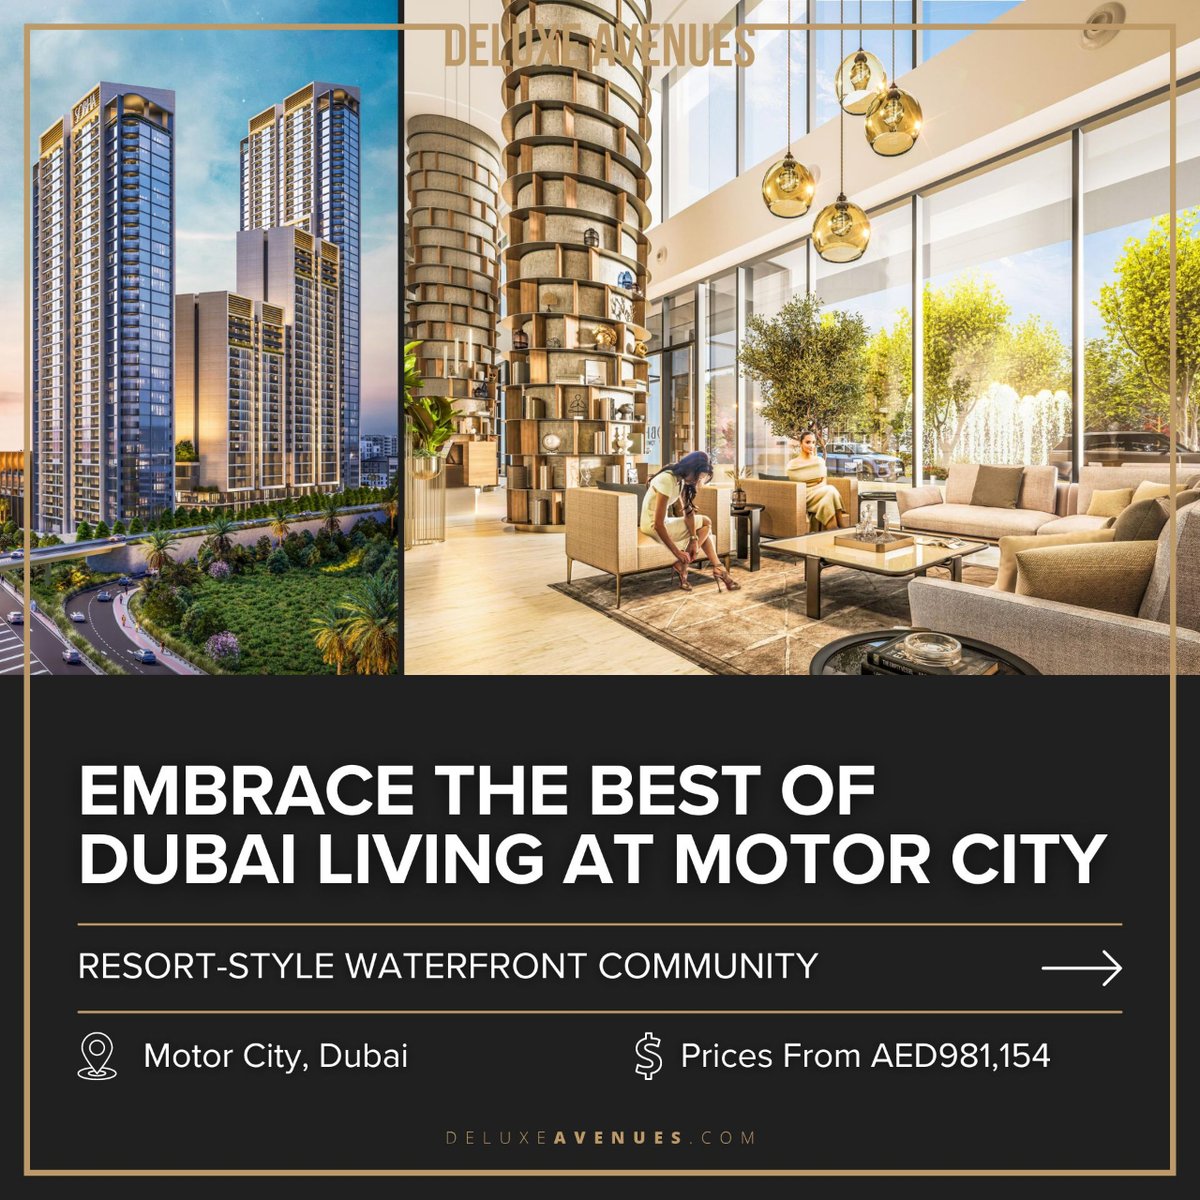 🌿 Live amidst lush landscapes at #SobhaOrbis where every window frames exclusive green views.

👉 Learn more at davenues.com/dubai/sobha-or…

#GreenLiving #NatureLovers #DubaiLiving #LuxuryLiving #DeluxeAvenues #RealEstate #Investment #Dubai #DubaiRealEstate #DubaiAvenues